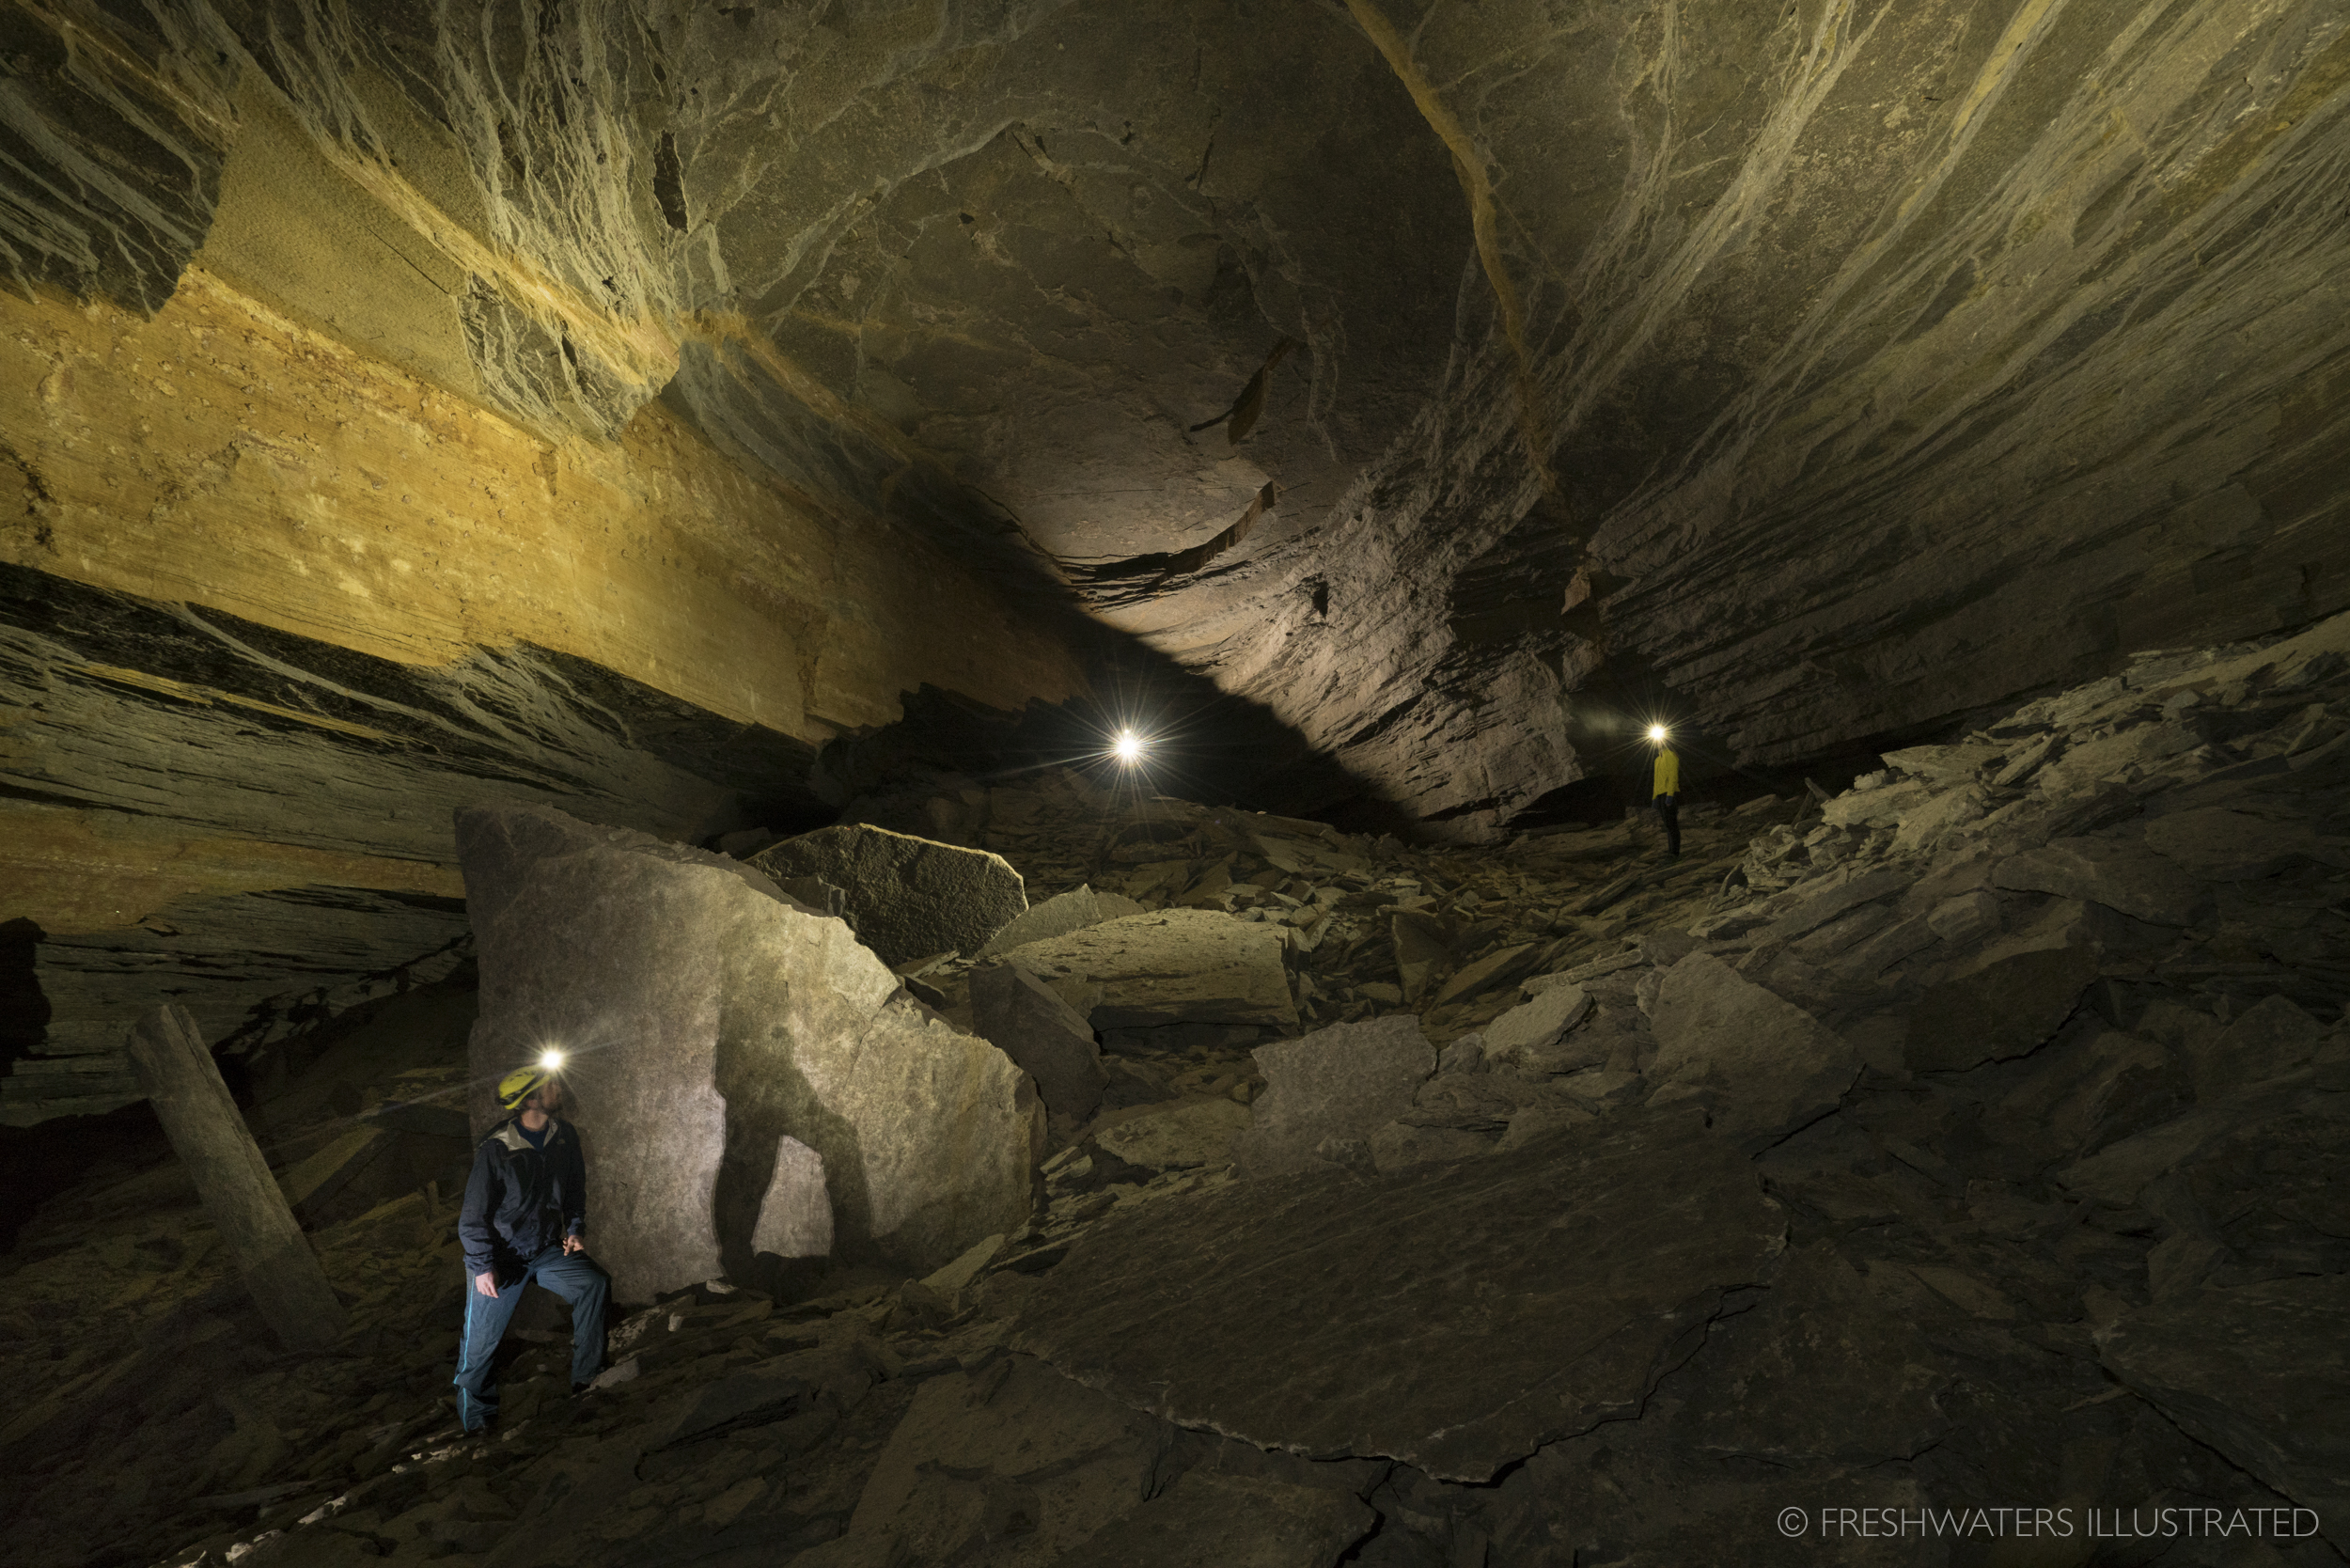  Illuminating the mysteries of the Grand Canyon, a team of Park Service hydrologists explore a massive underground chamber far below the Grand Canyon's North Rim. Part of a complex network of underground streams, the flowing waters that carve these c